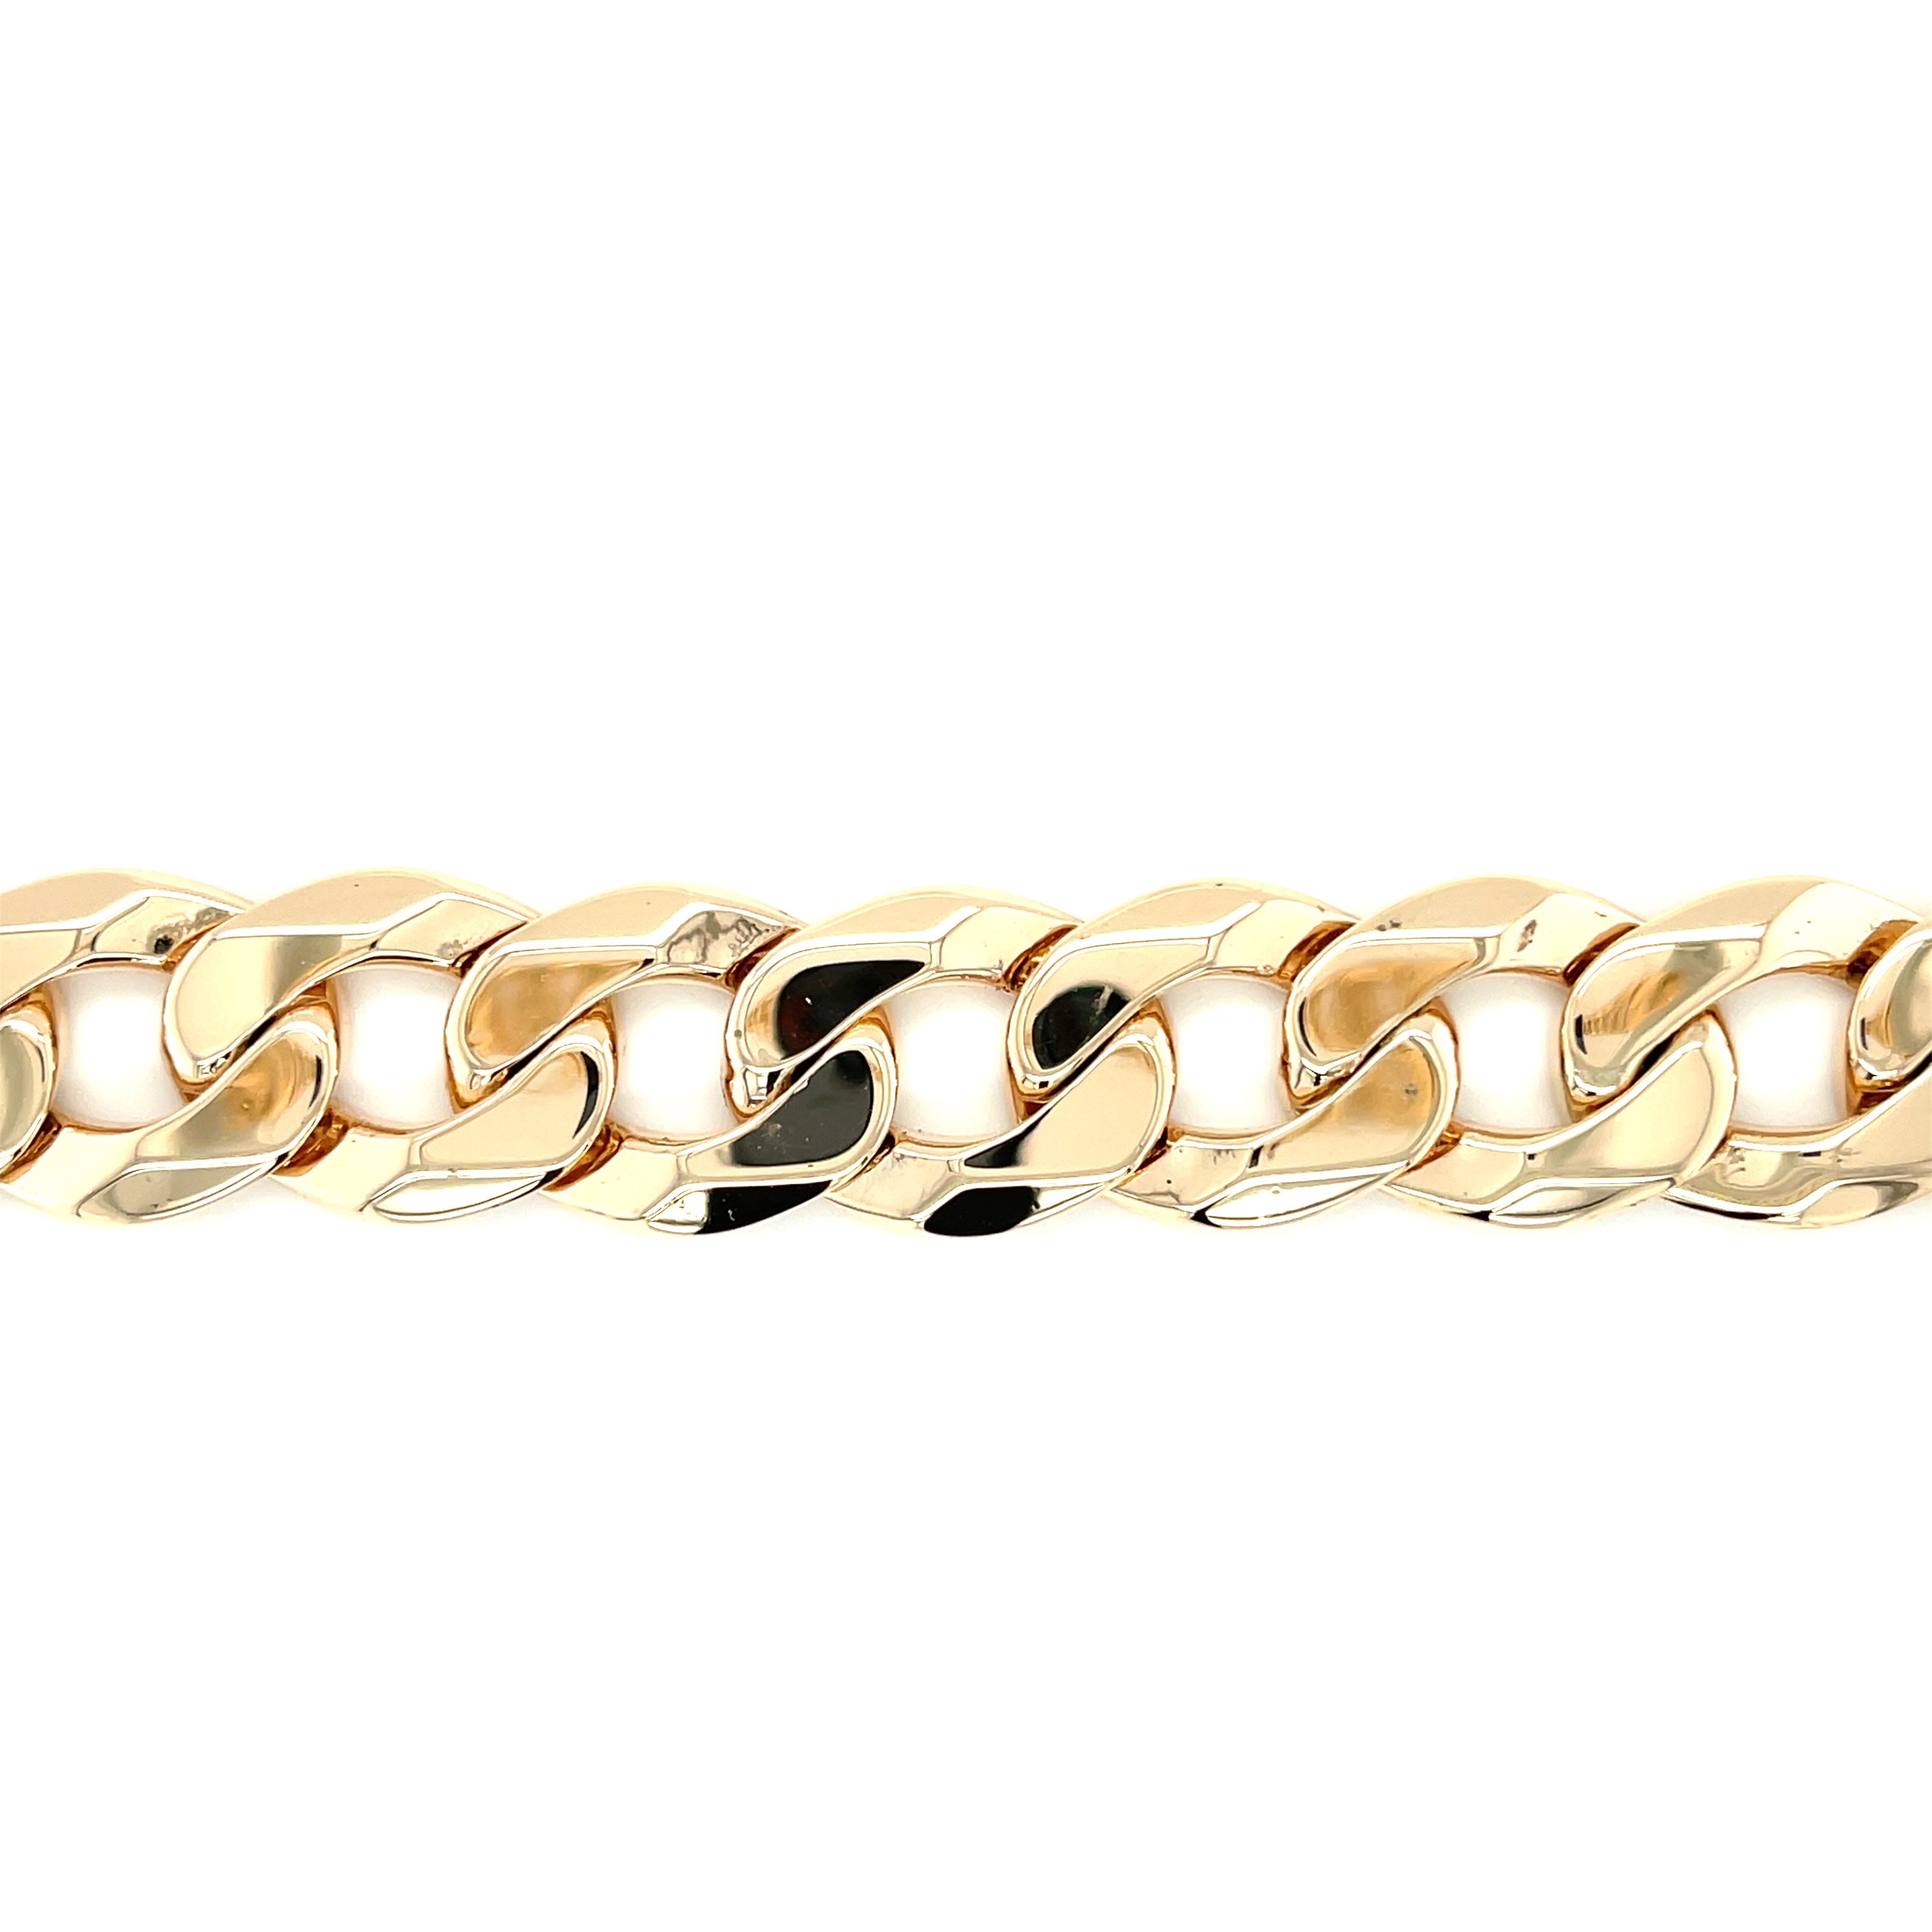 9ct Yellow Gold Heavy 9 Inch Curb Link Bracelet - 88.50g SOLD